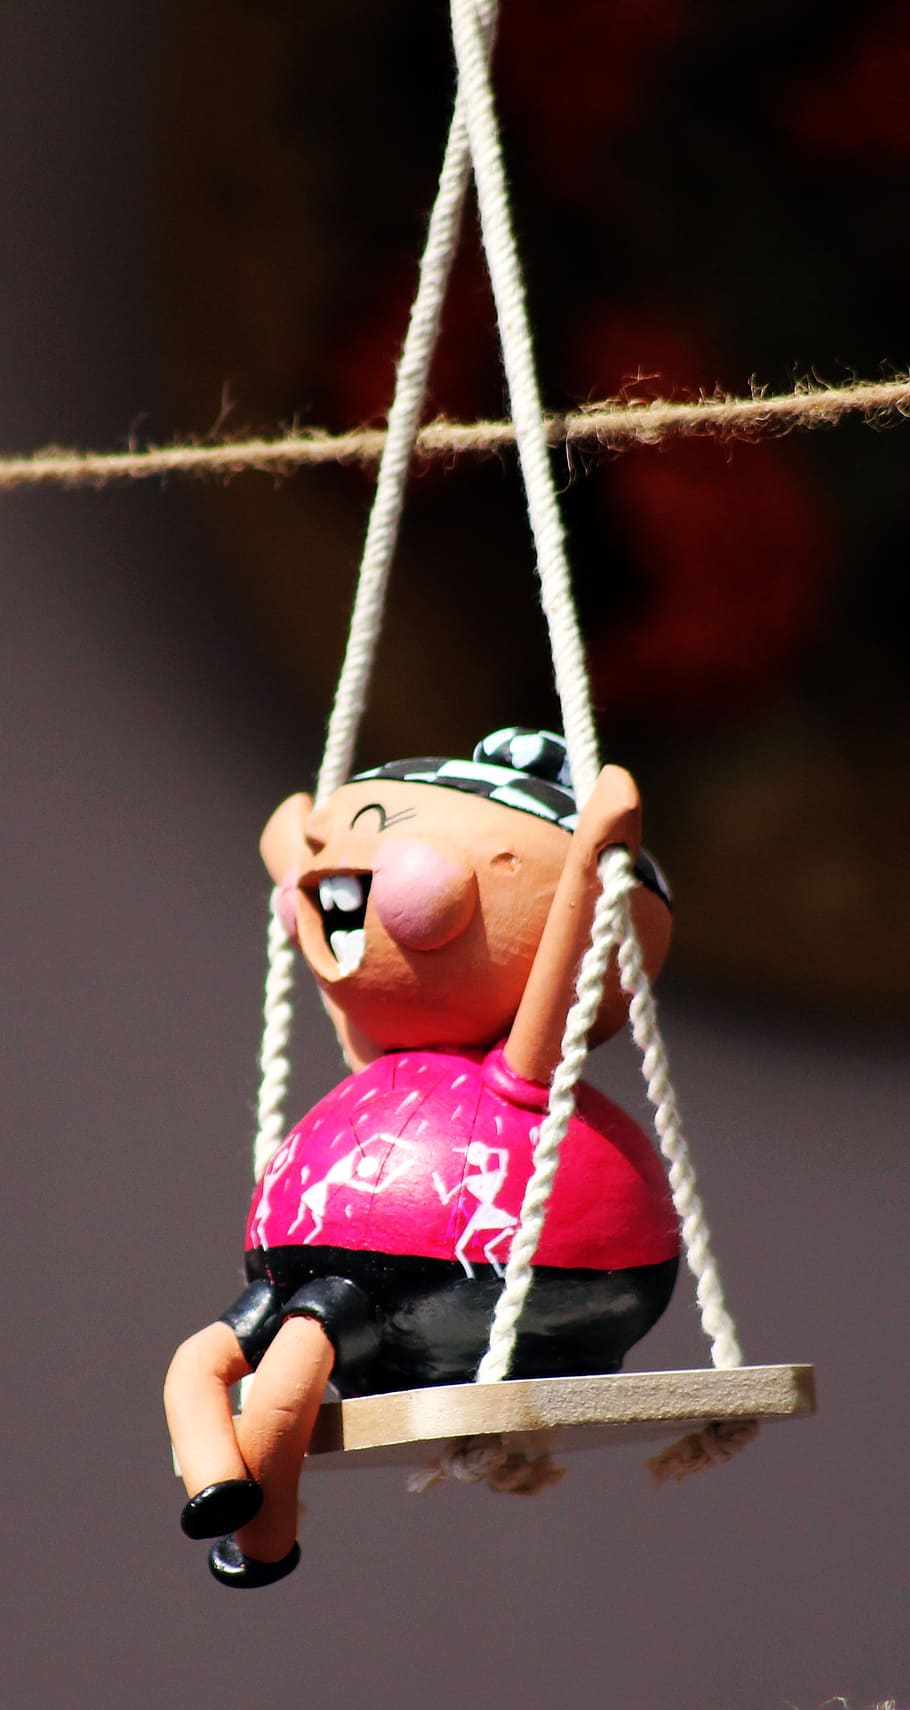 puppets, swing, toy, happy, play, rope, one person, hanging, focus on foreground, human body part